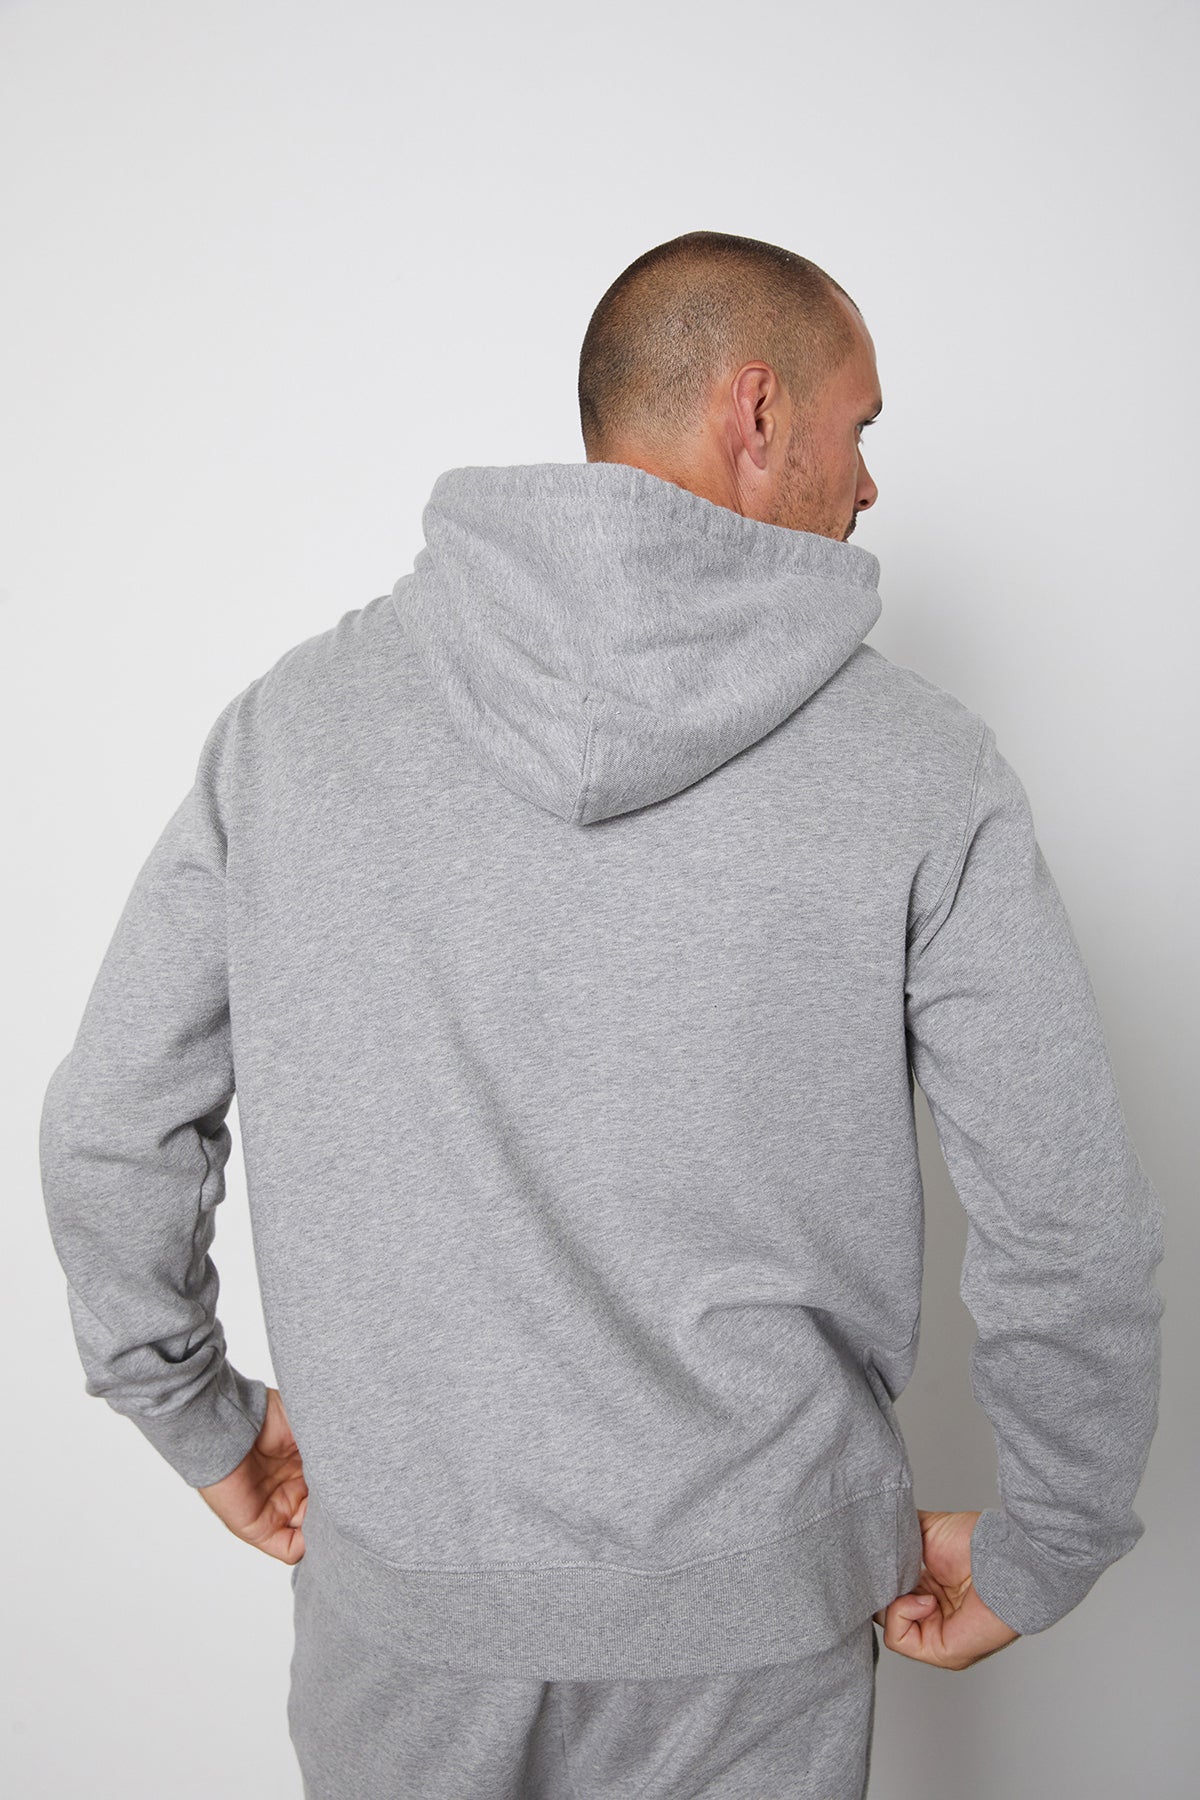 A man is standing with his back to the camera, wearing a Velvet by Graham & Spencer COOPER PULLOVER HOODIE and gray pants.-24522978263233